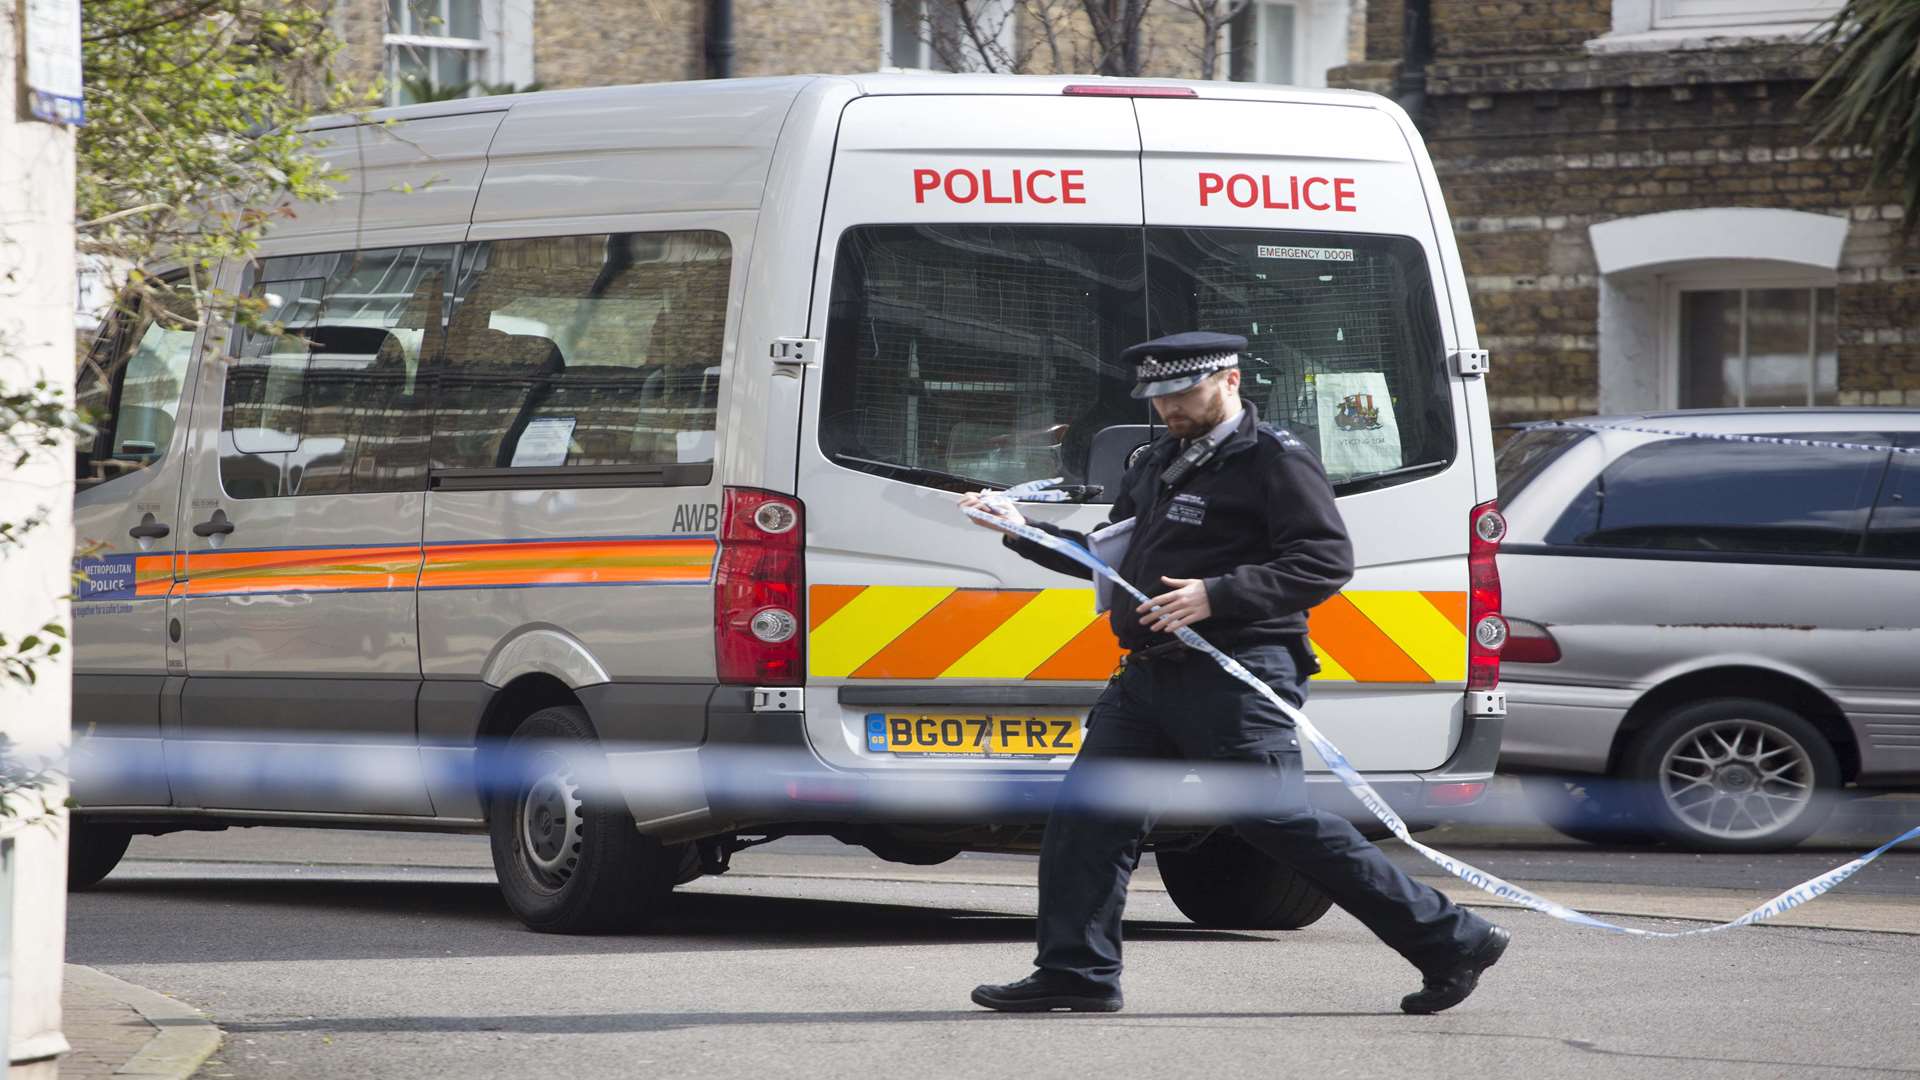 Police van at Southwark Estate where Mr Semple's remains were found. Picture: SWNS.